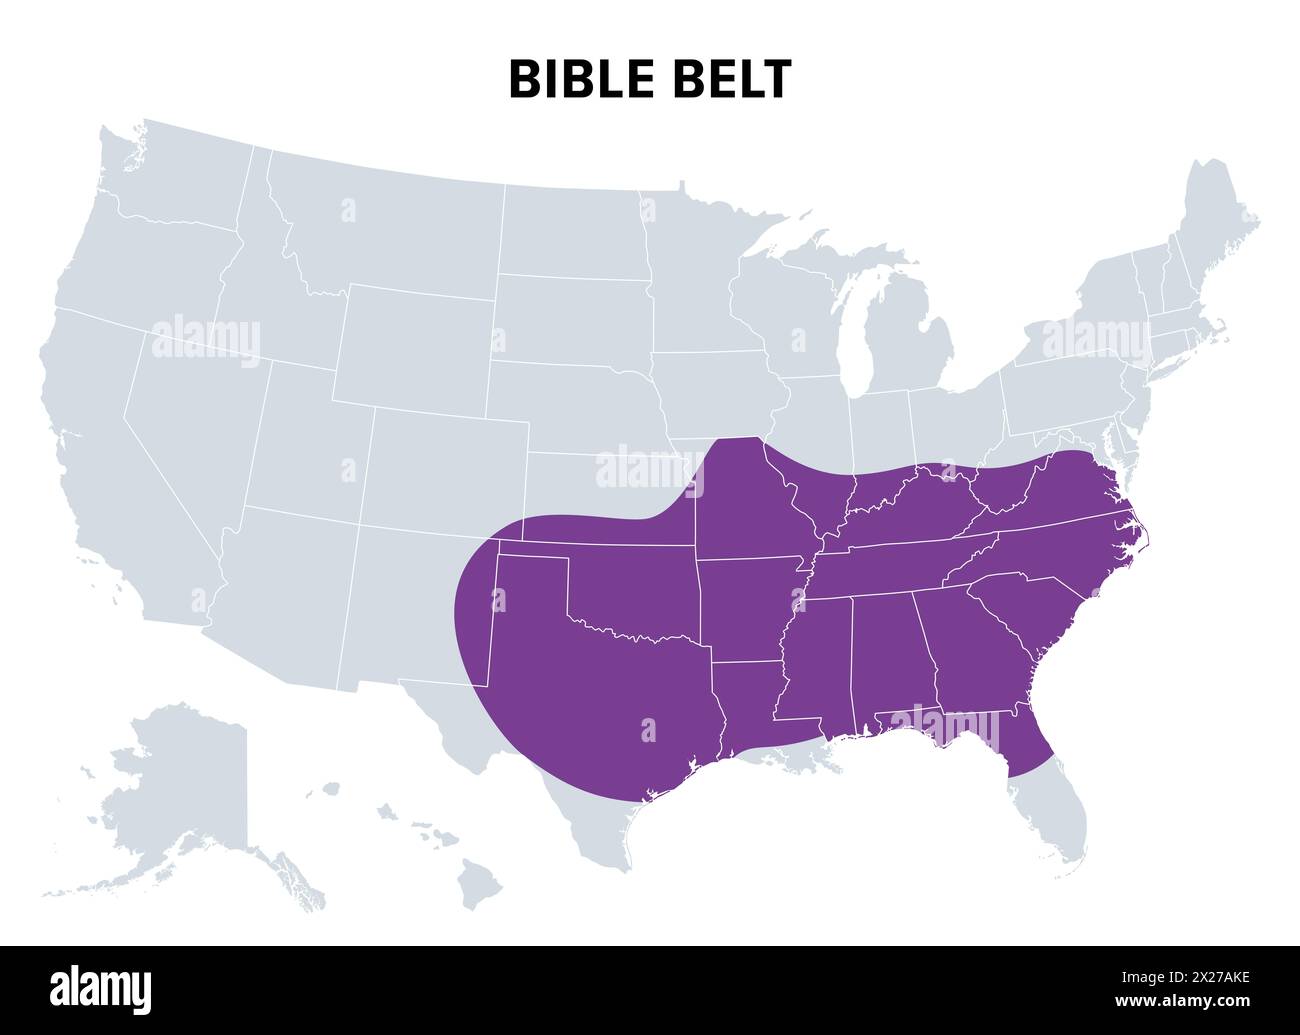 Bible Belt of the United States, political map. Region of Southern United States and state of Missouri. Stock Photo